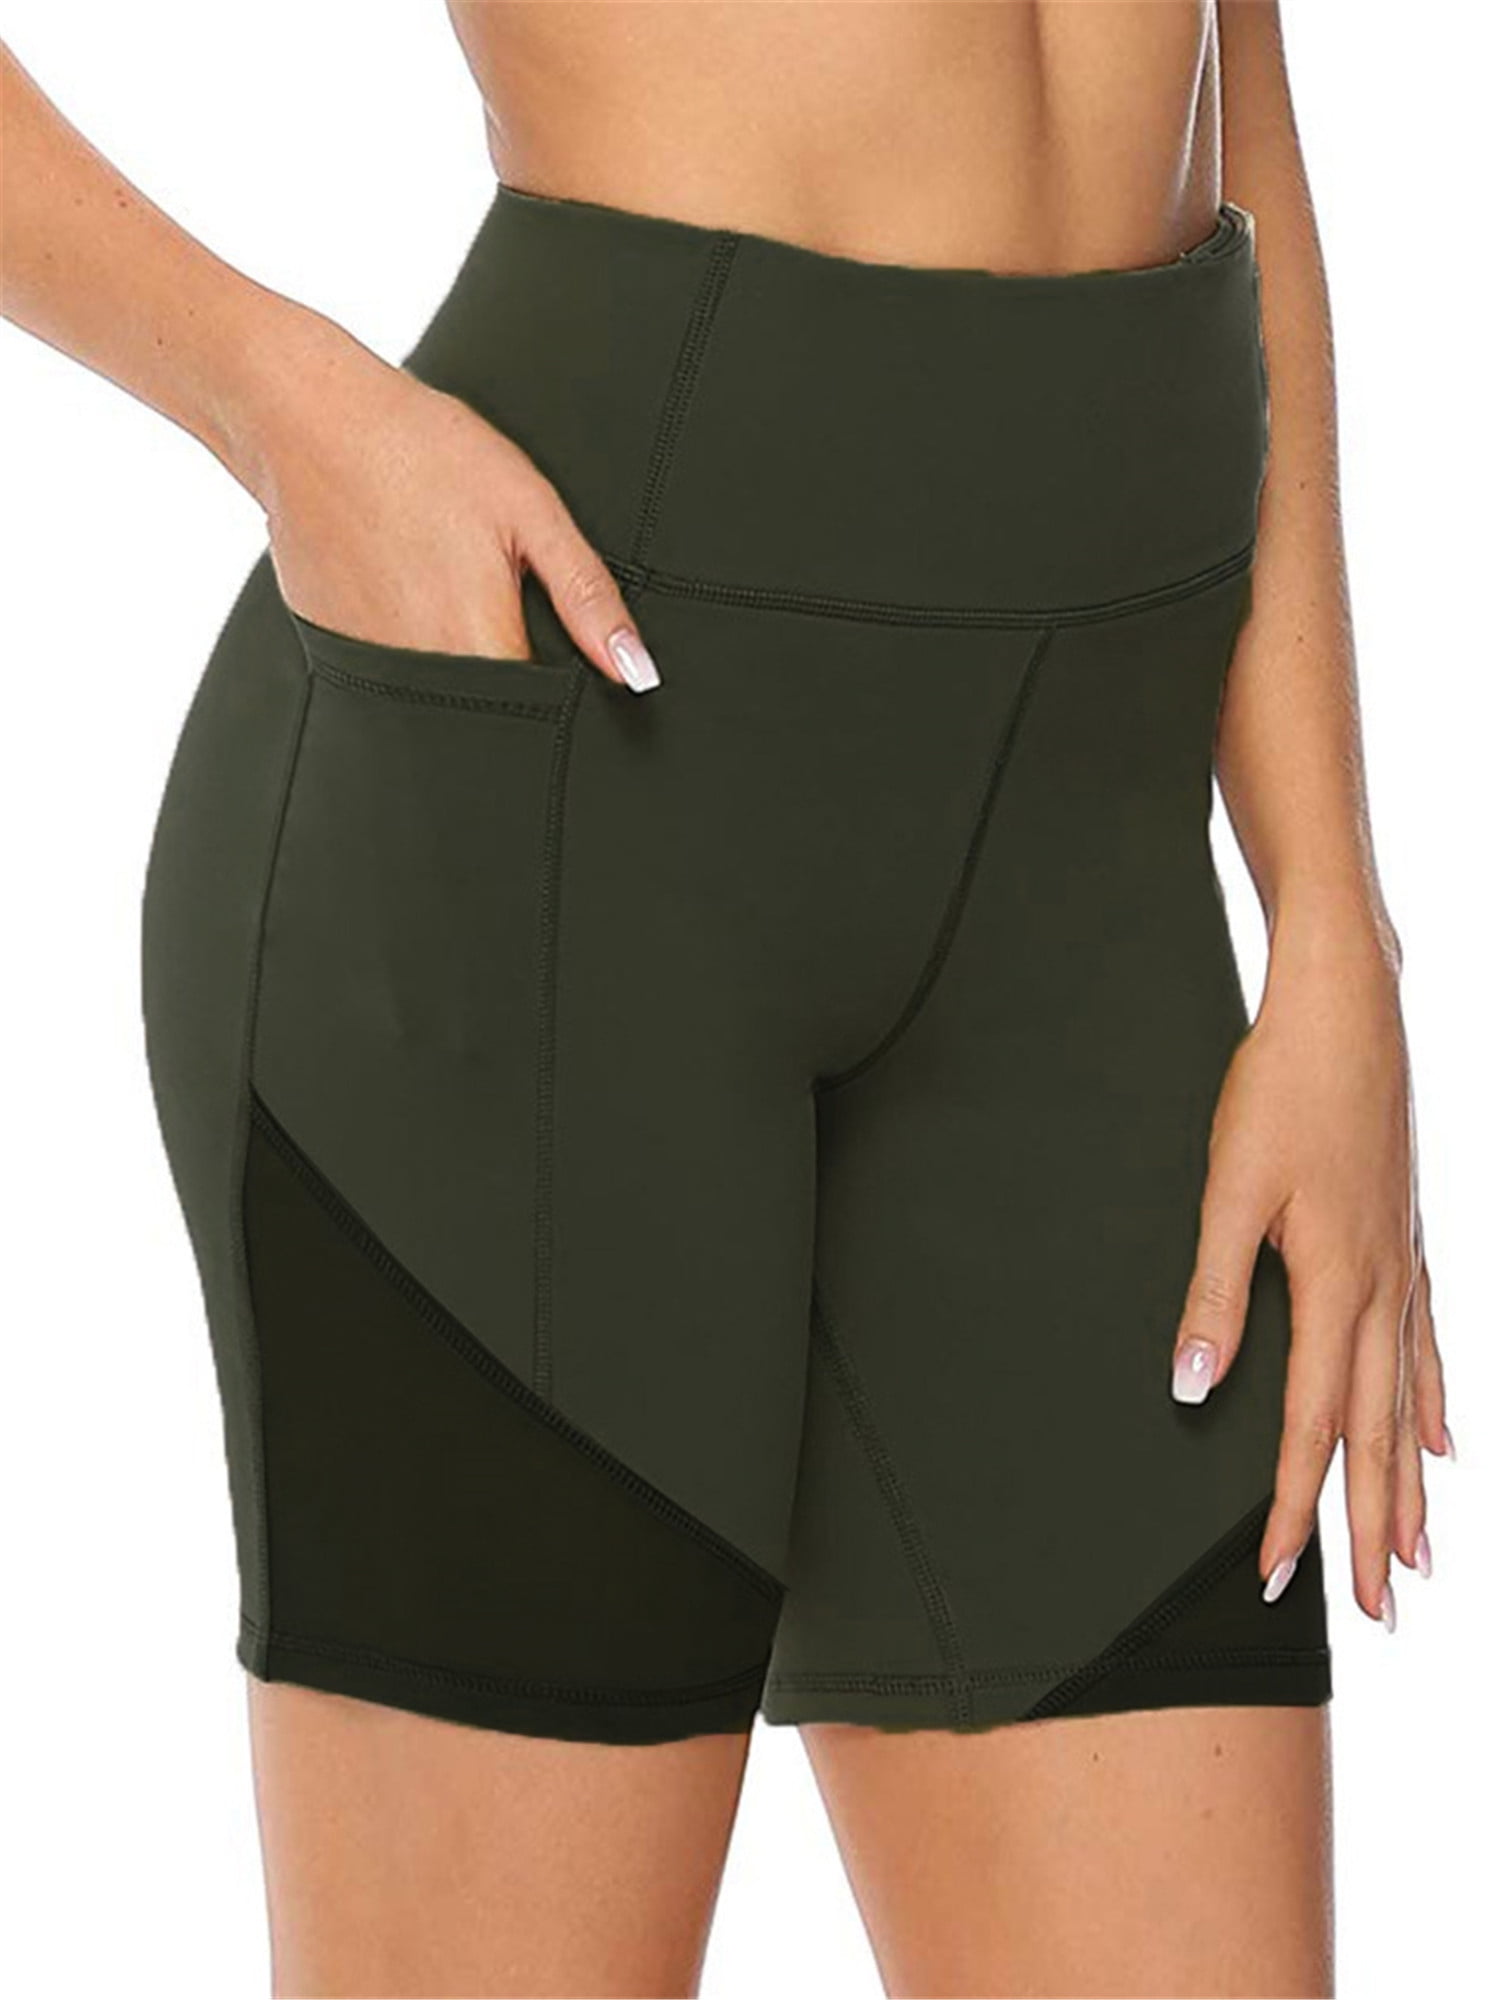 Aunavey - Aunavey High Waist Yoga Shorts for Women with 2 Side Pockets ...